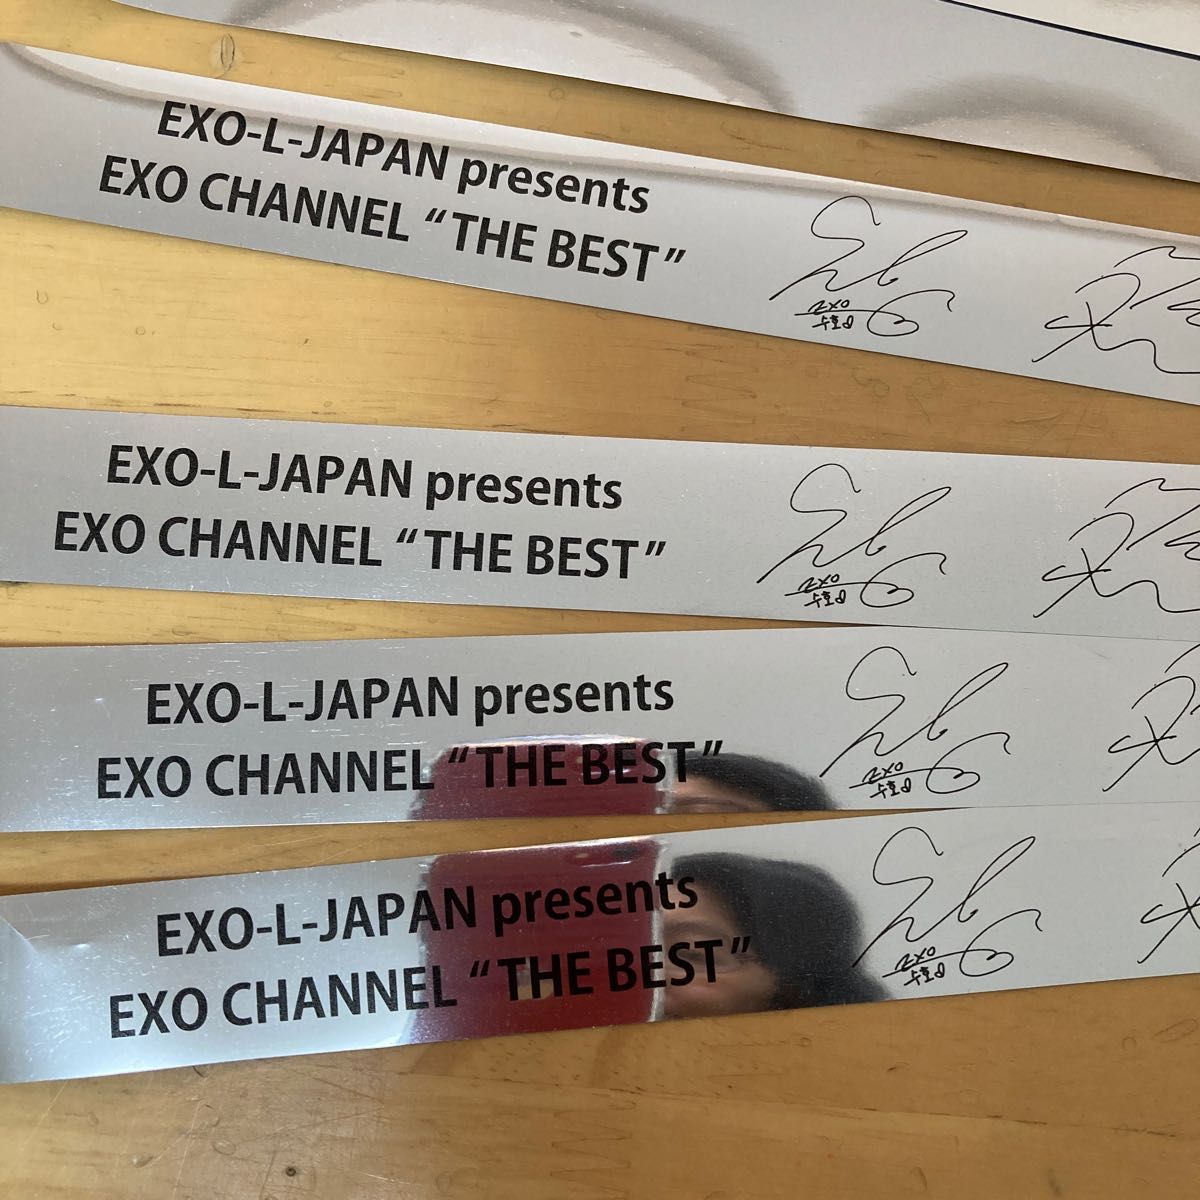 EXO CHANNEL THE BEST  ハンドクラッカーと銀テ４本